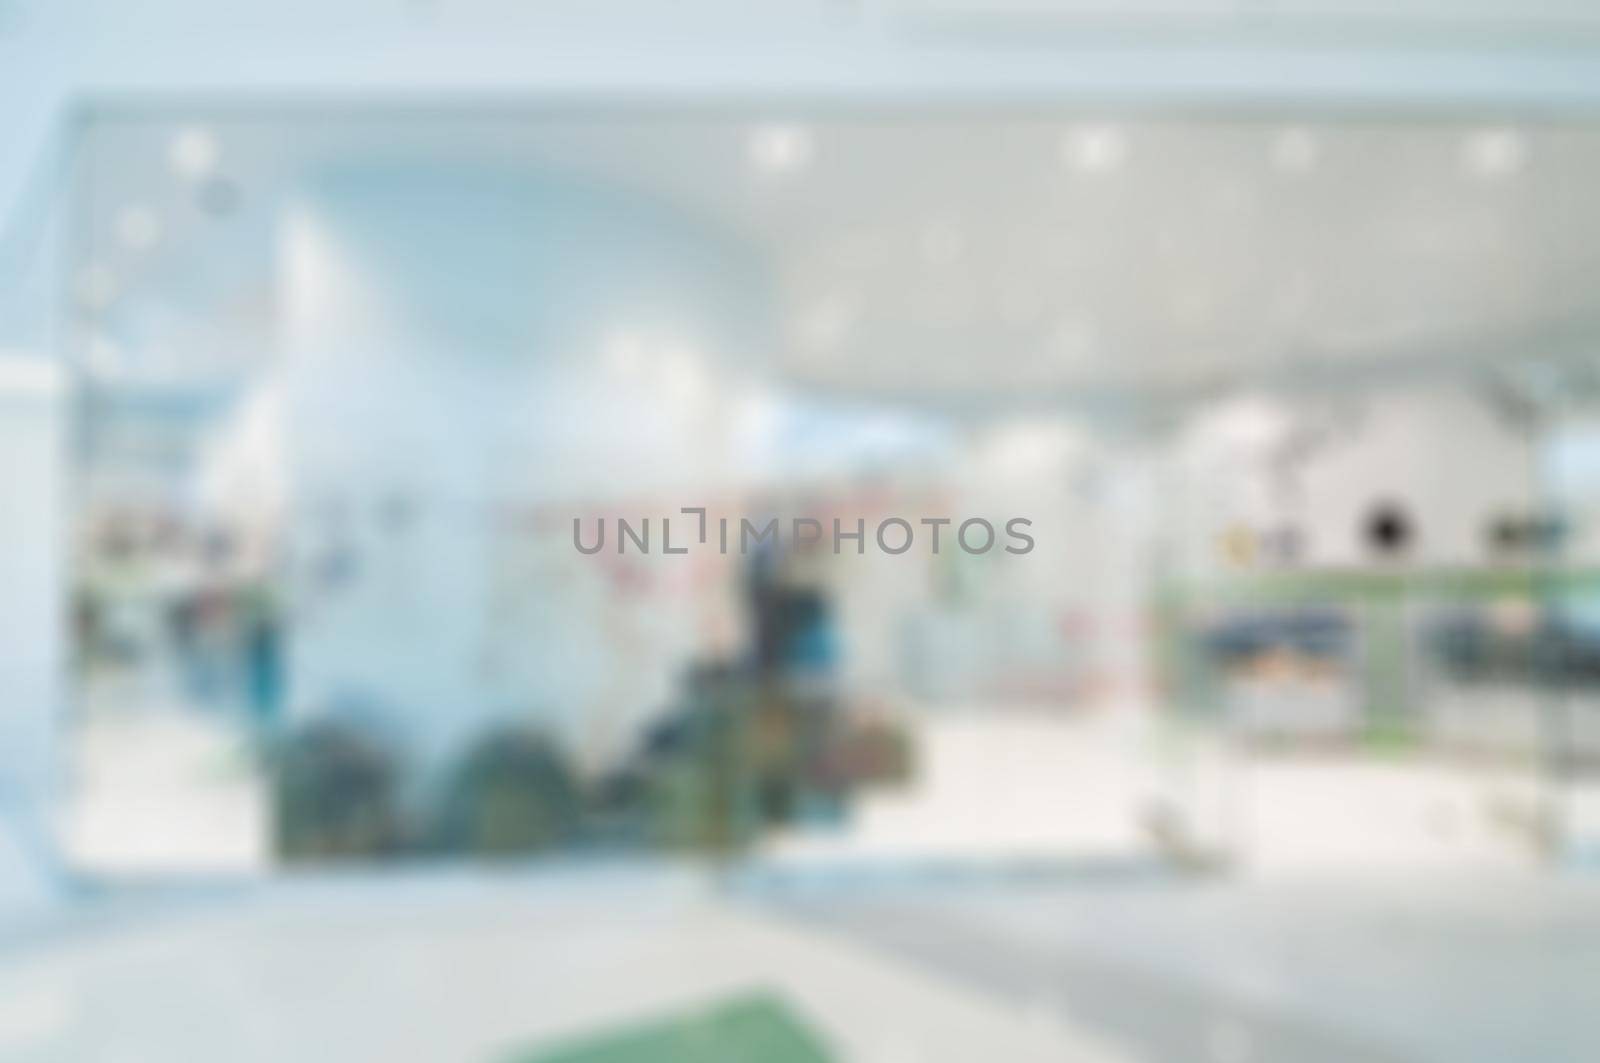 Abstract backdrop - Shopping mall theme blur background